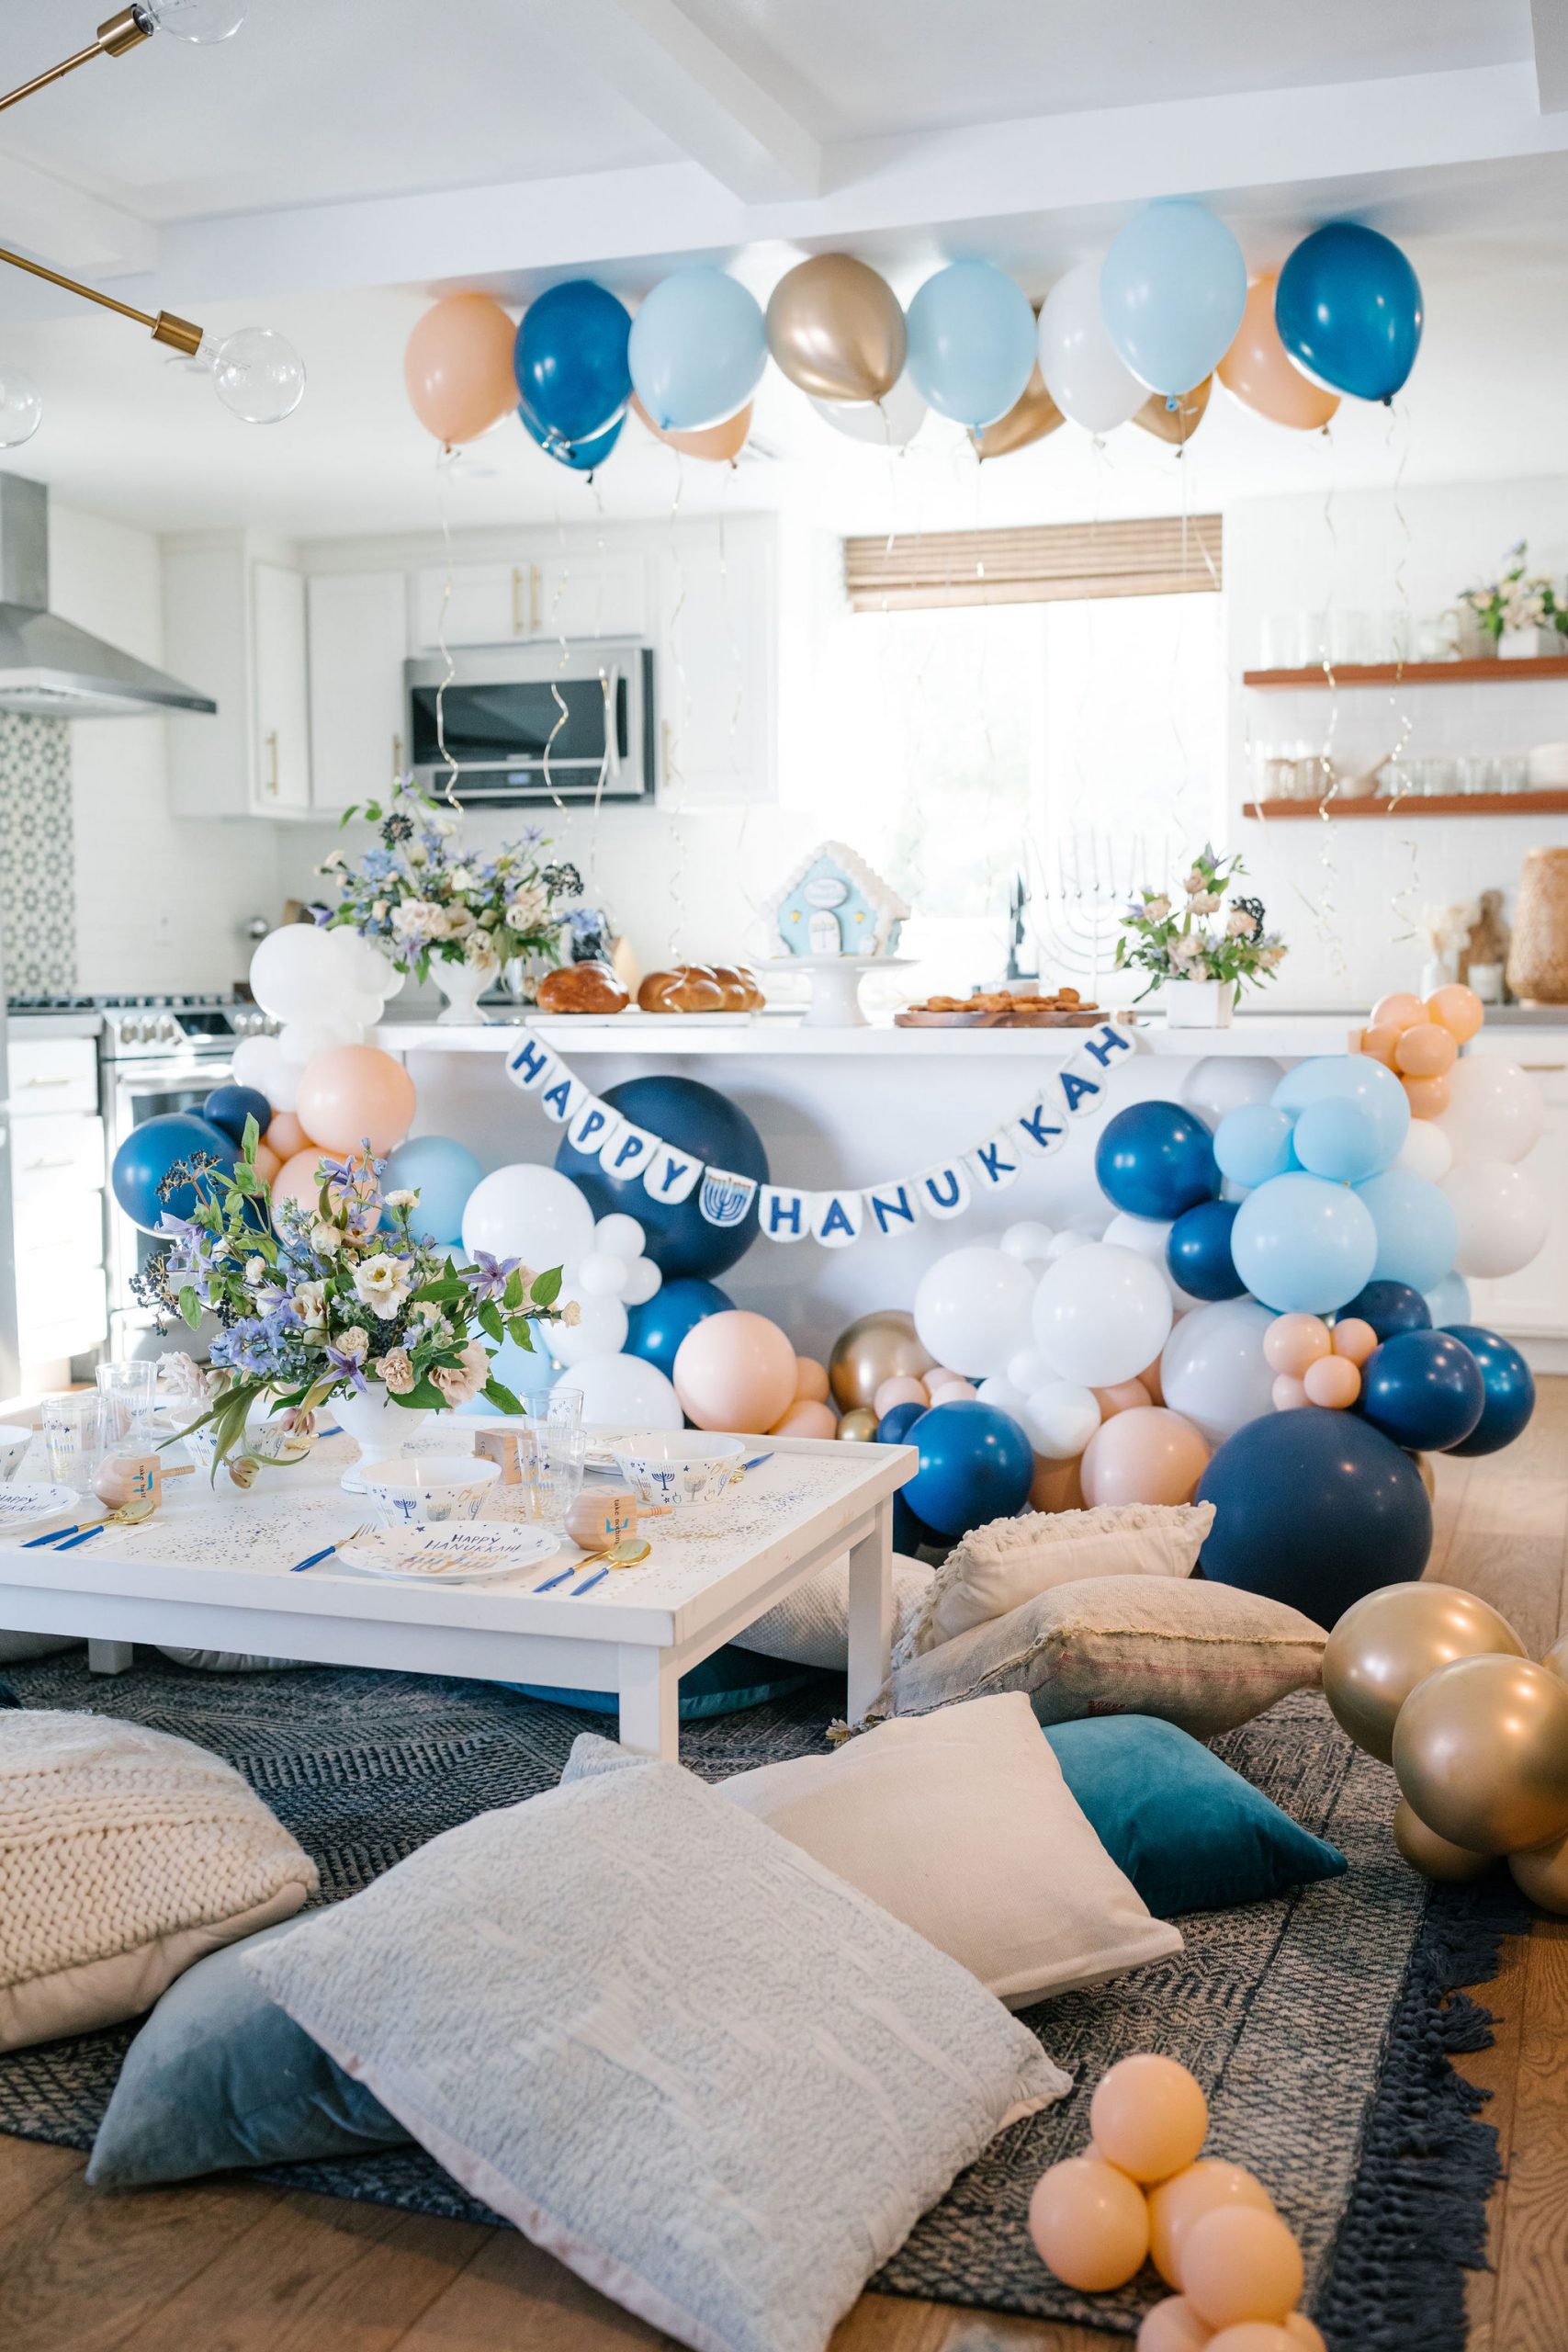 A Beautiful Hanukkah Celebration at Home full of Delight with Pottery Barn Kids